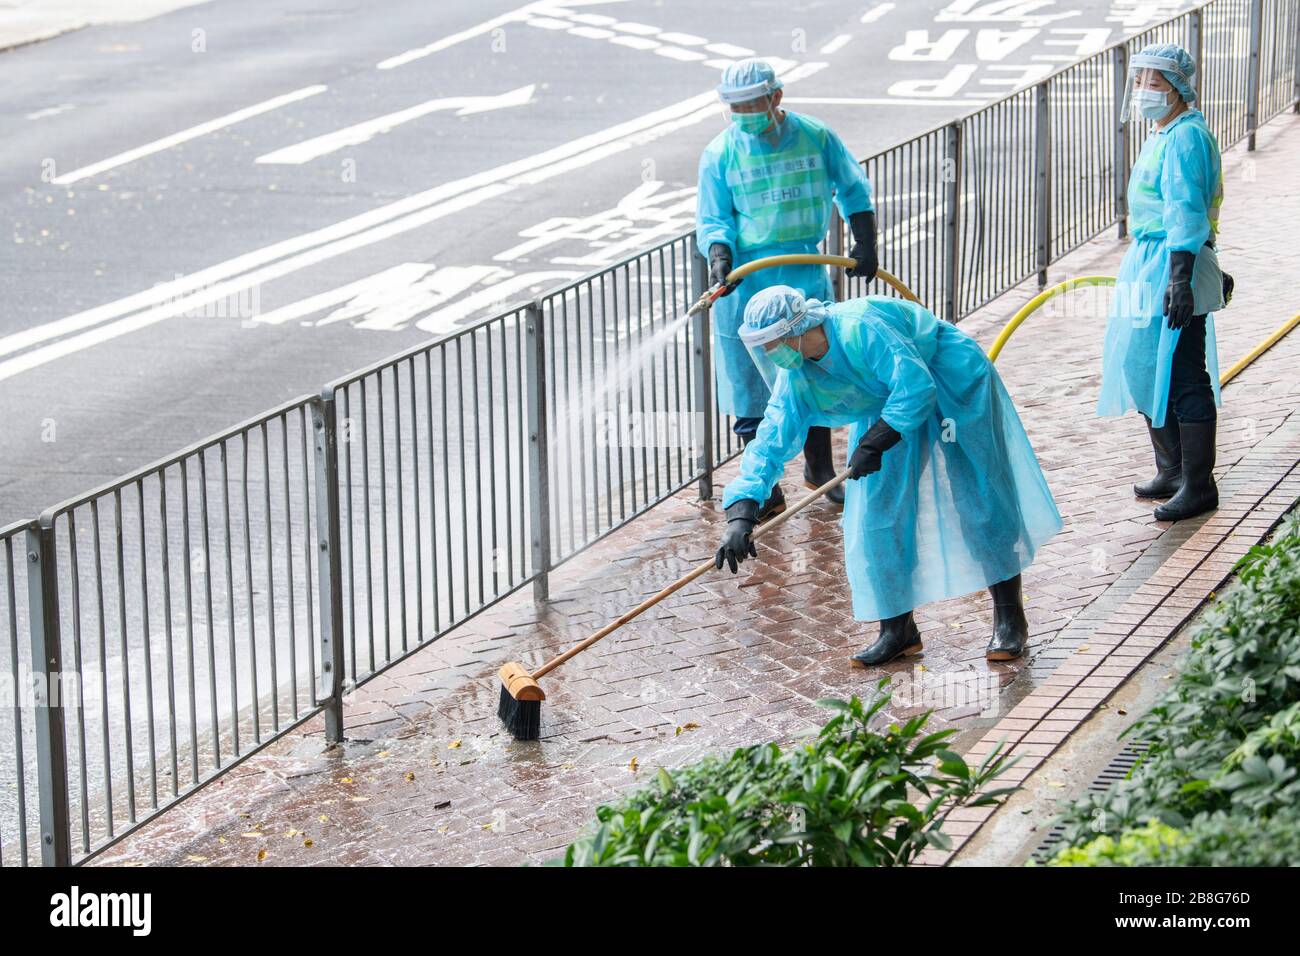 Hong Kong, China. 22nd Mar 2020. Workers from the FEHD (The Food and Environmental Hygiene Department of the Hong Kong Government) disinfect the streets in Fortress Hill amid a rapid spike of Cover-19 virus infections. As the pandemic takes hold Hong Kongers, including students and travelers rushed back to the city before the border closure bringing the infection with them.Alamy Live news/Jayne Russell Credit: Jayne Russell/Alamy Live News Stock Photo